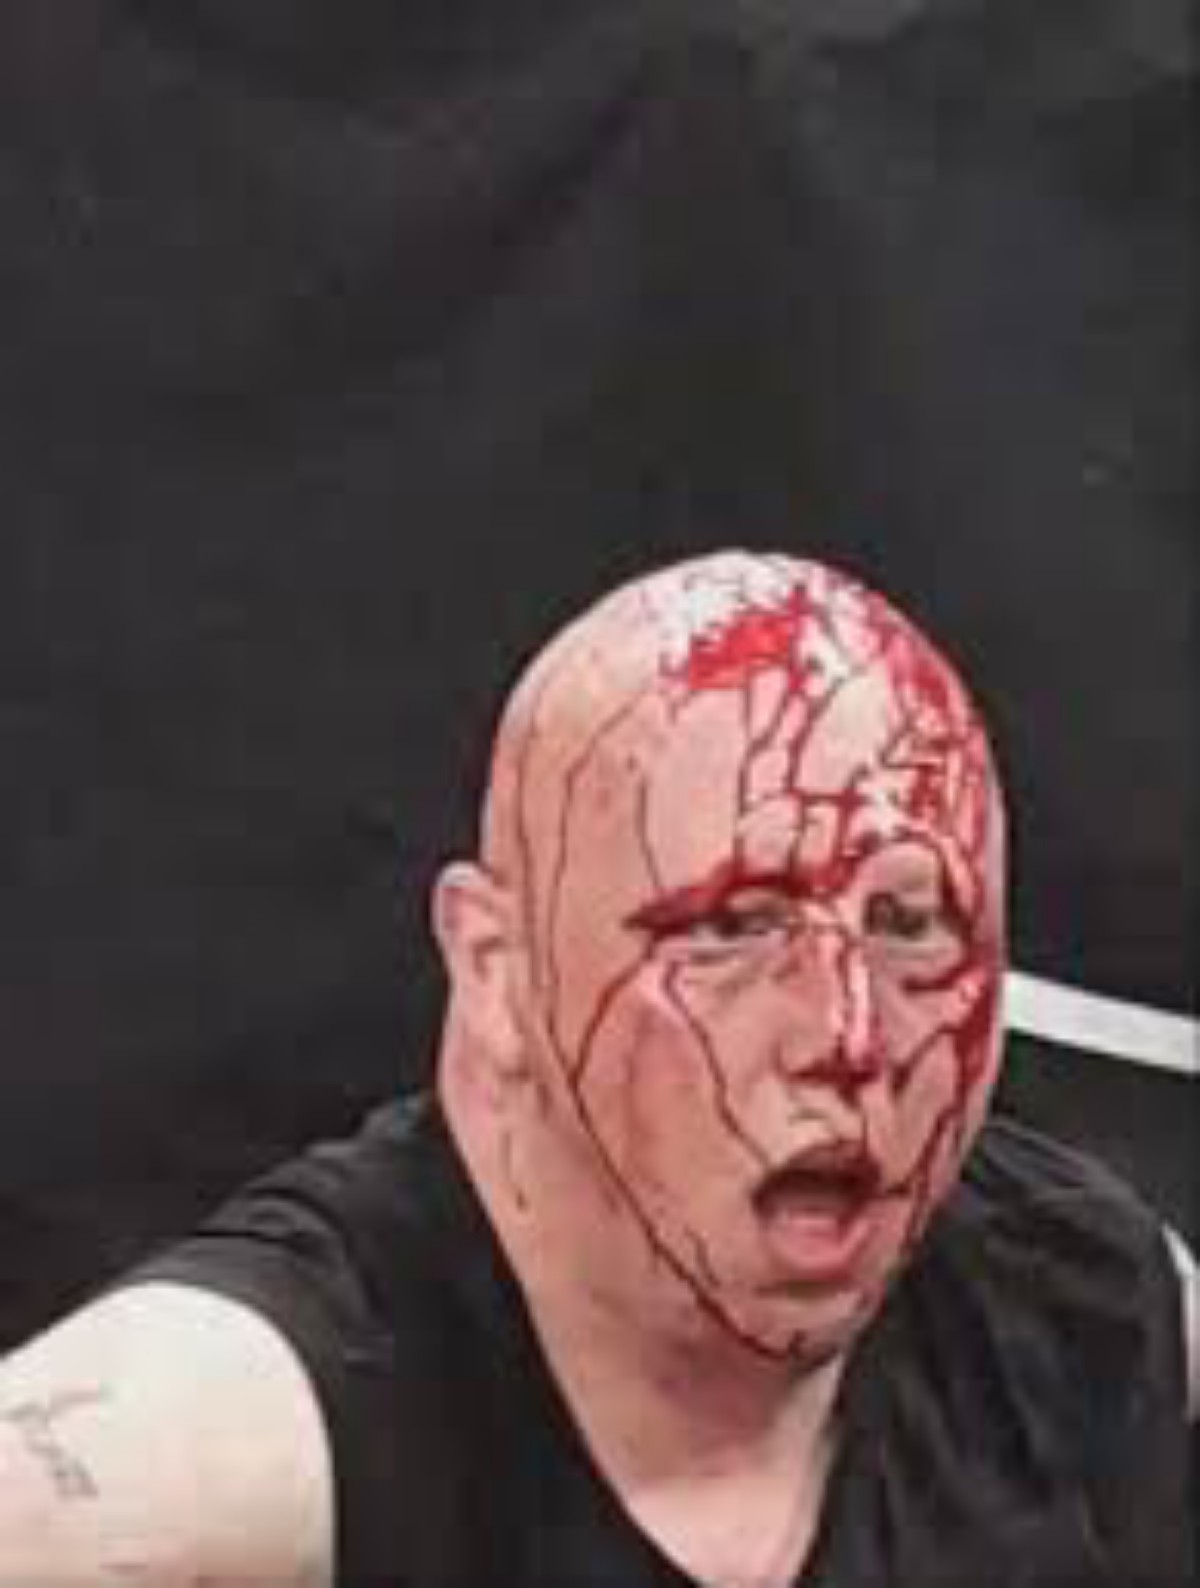 Family Wrestling Event Turned Into A Bloody Death Match (Graphic Pics)